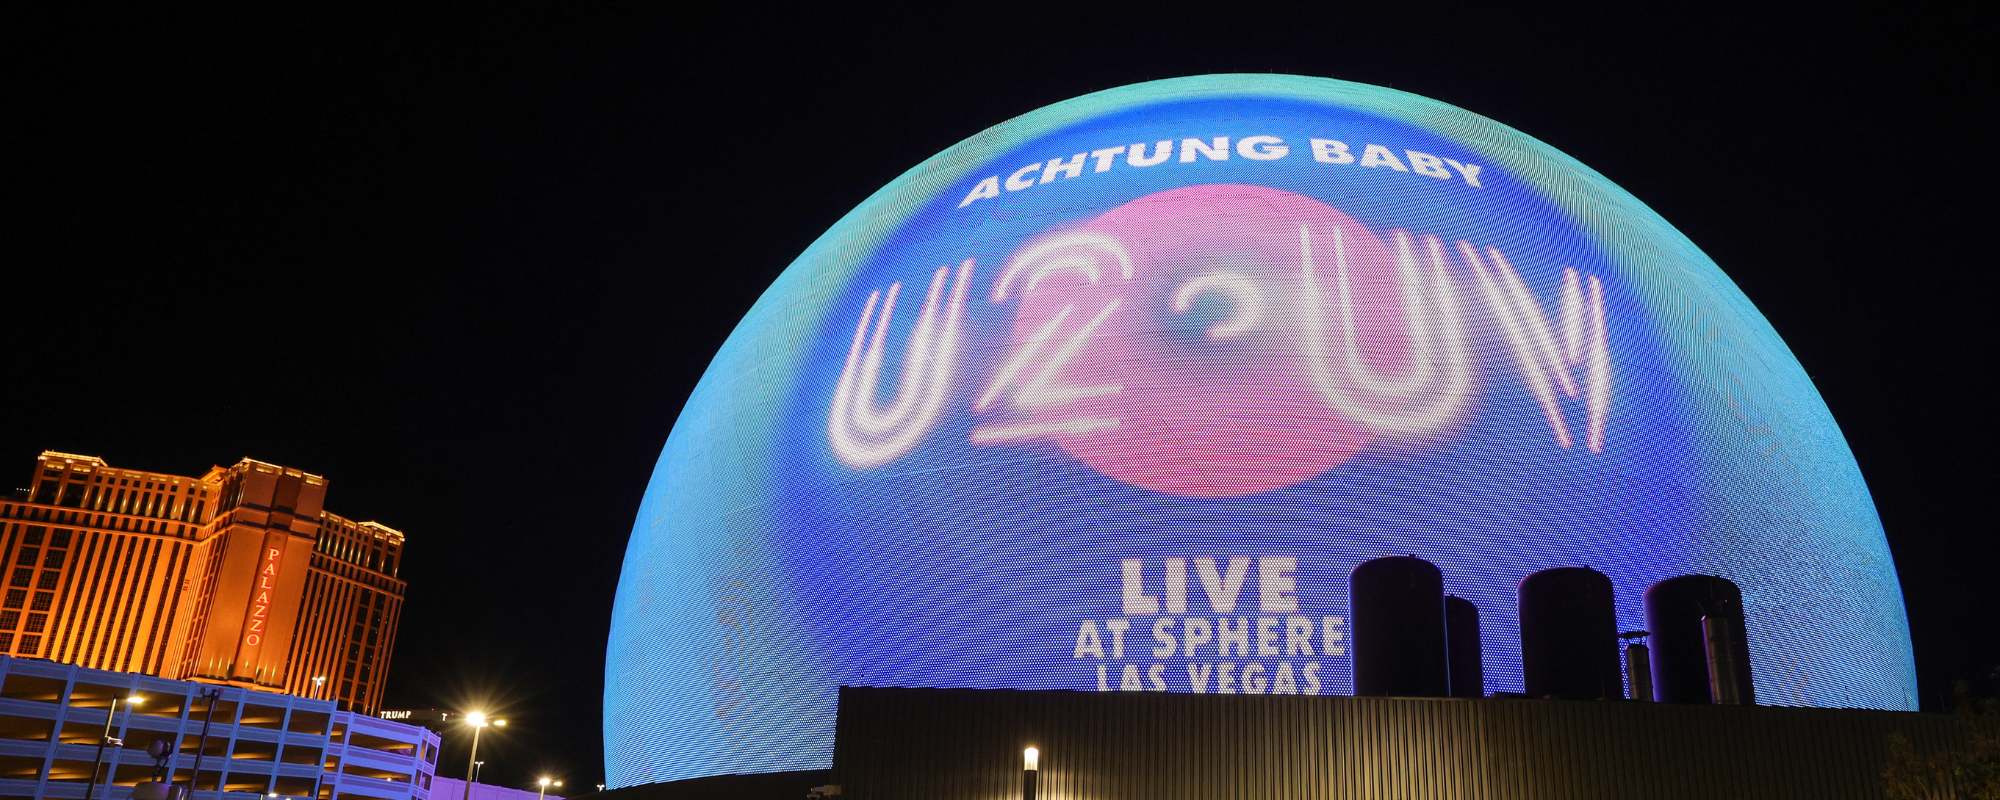 Exactly What It’s Like Inside the Sensory Overload of U2’s Vegas “Sphere” Show